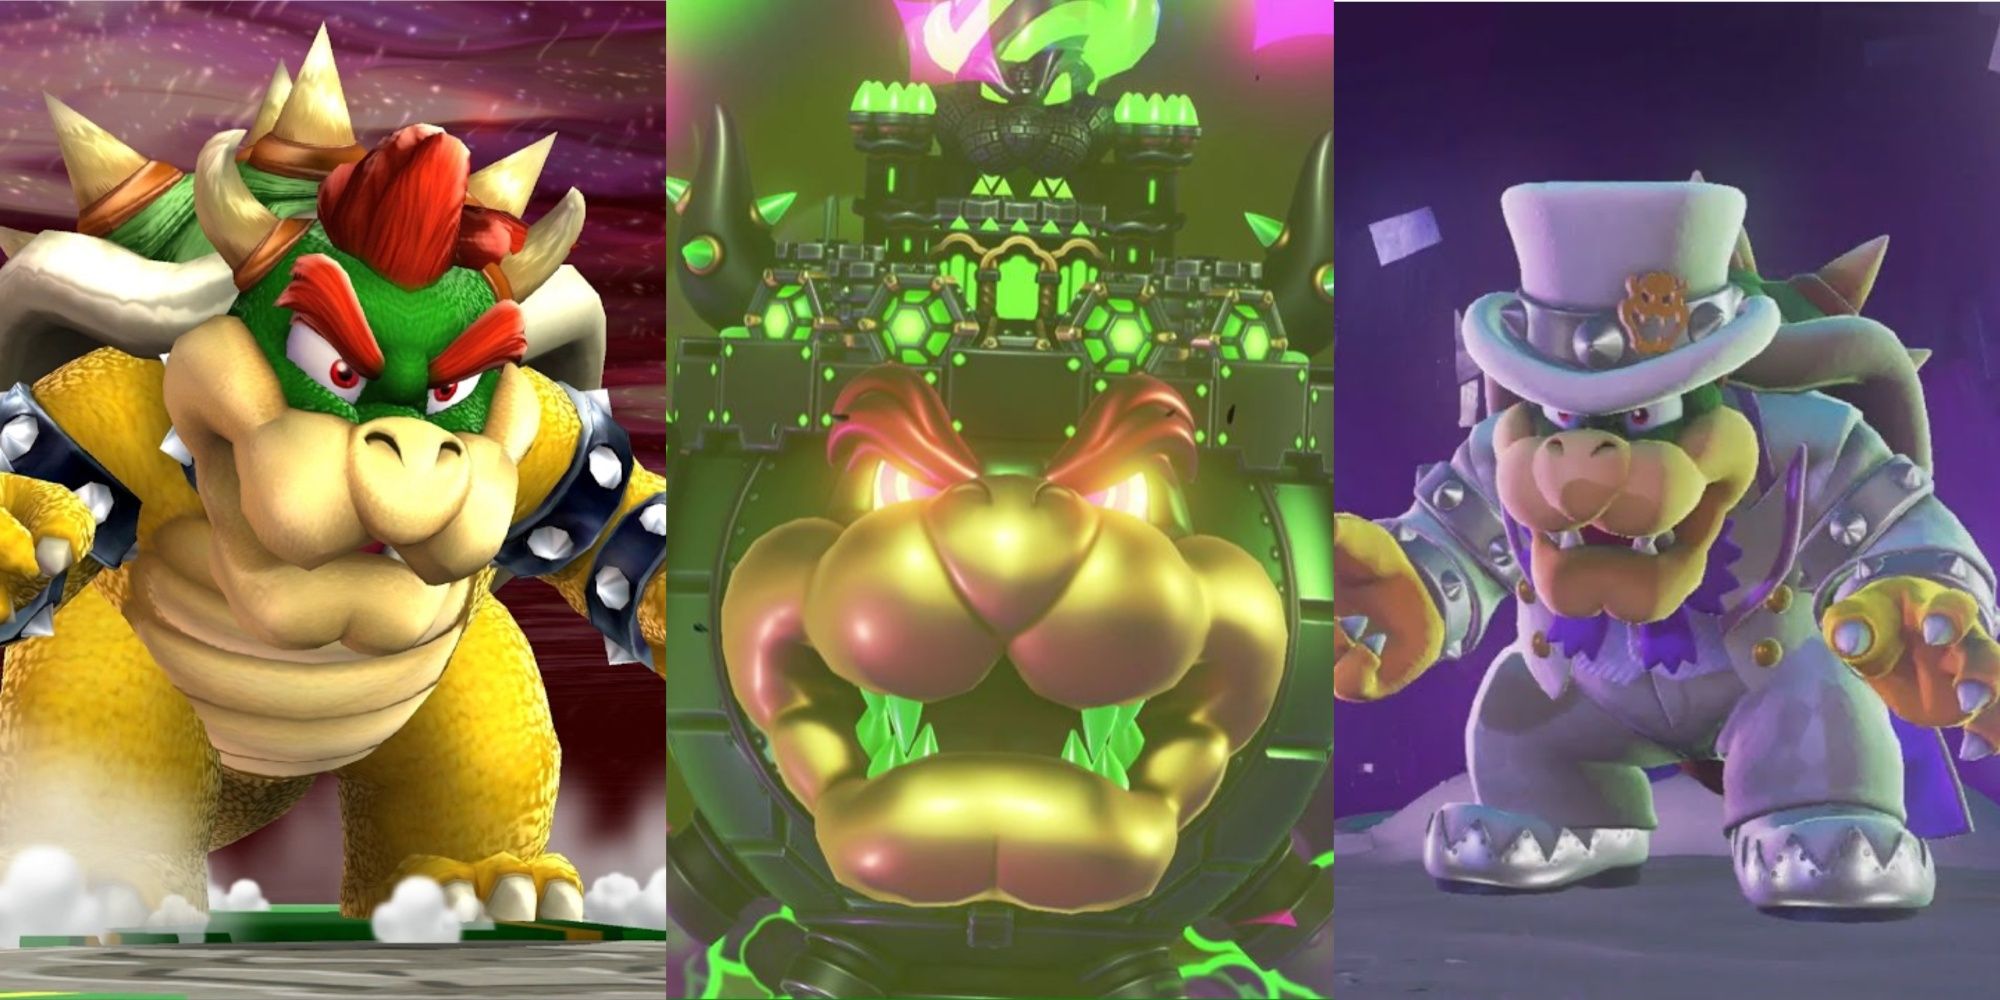 Bowser from Mario Galaxy 2, Bowser From Super Mario Wonder, Bowser in a suit form Super Mario Odyssey